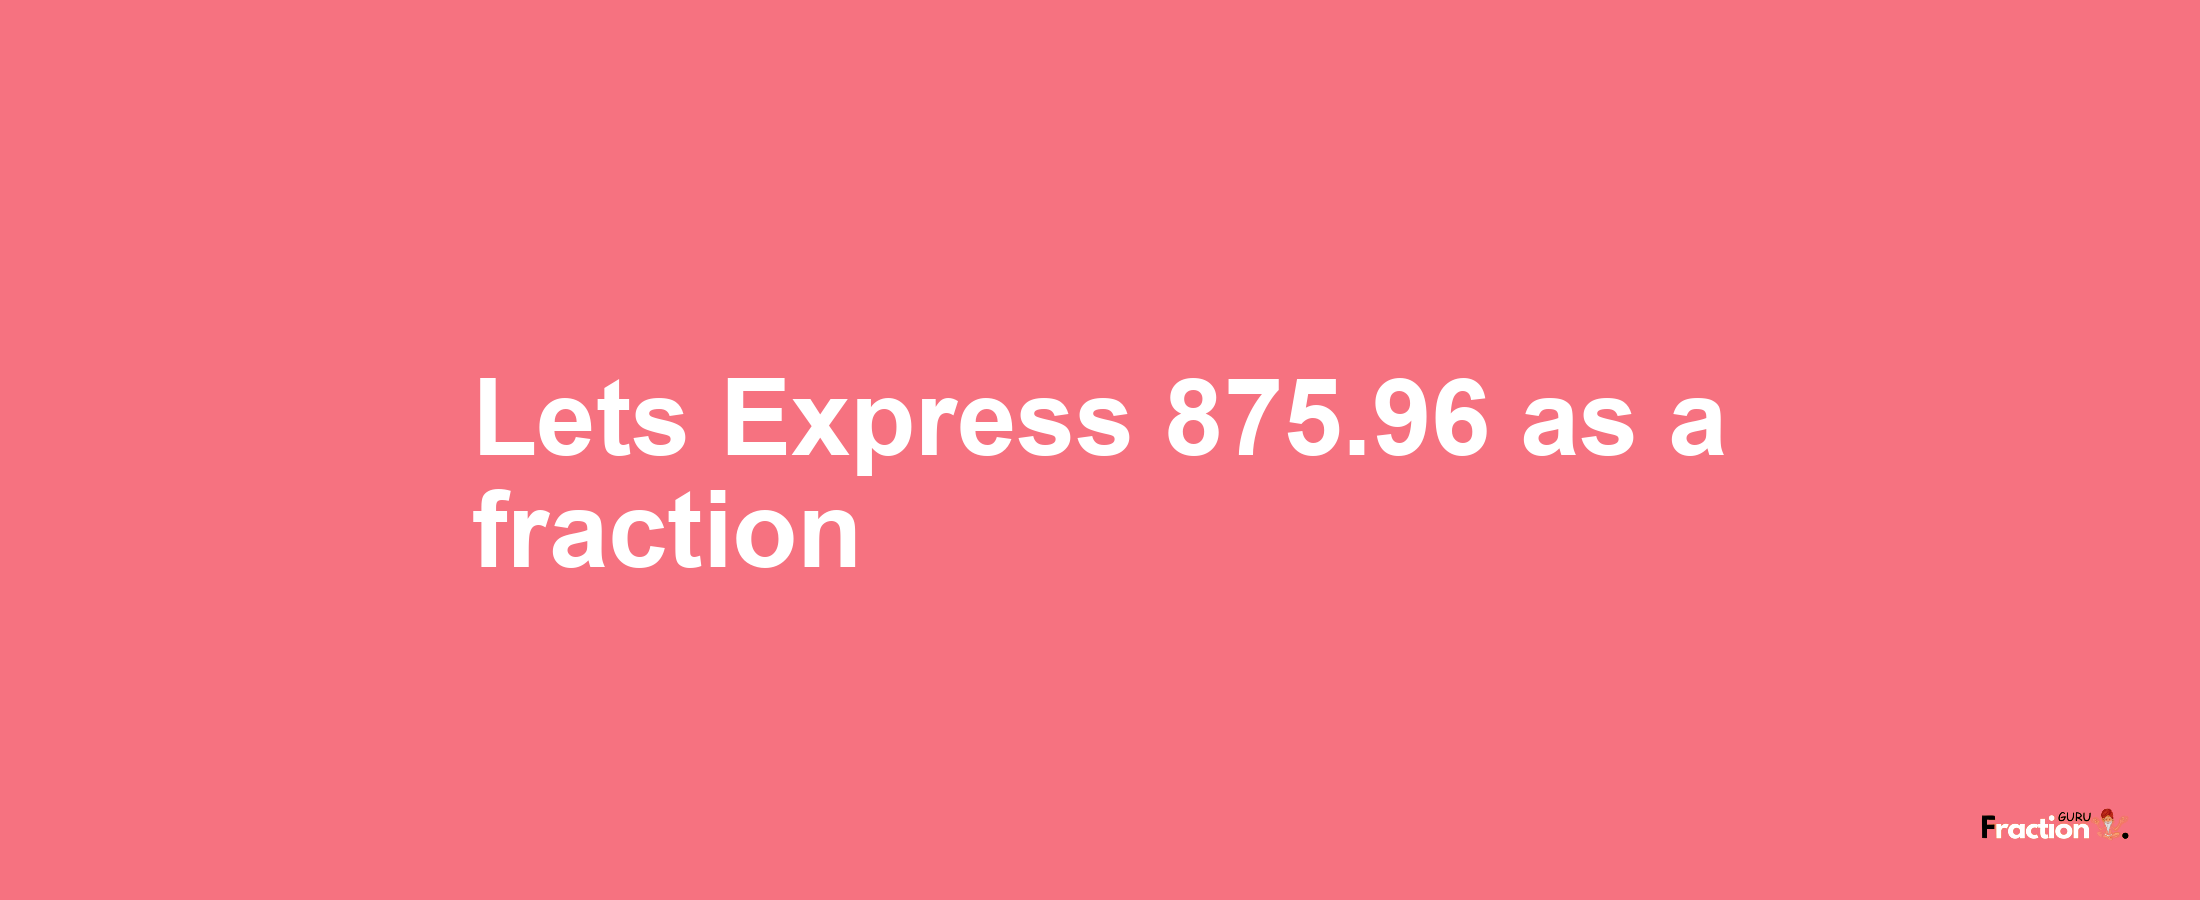 Lets Express 875.96 as afraction